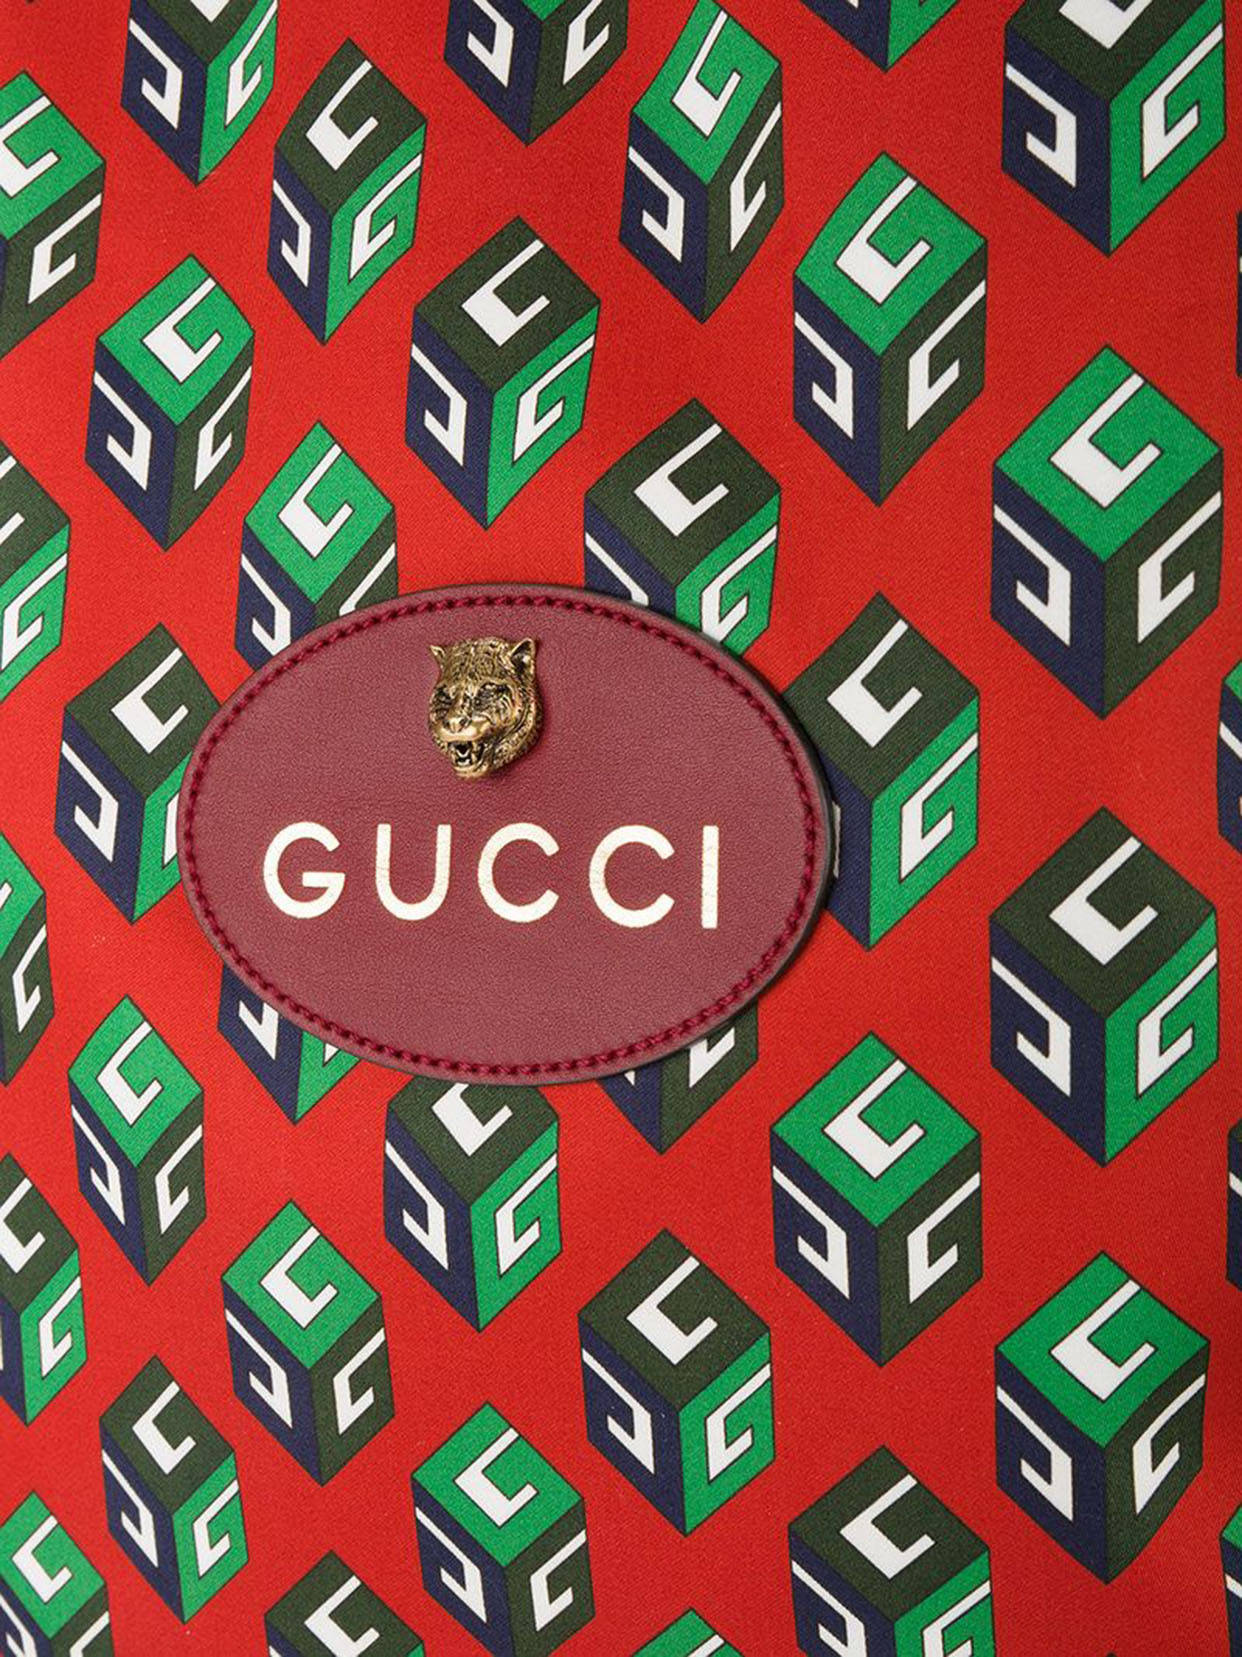 Red And Green Gucci Cube Pattern Background